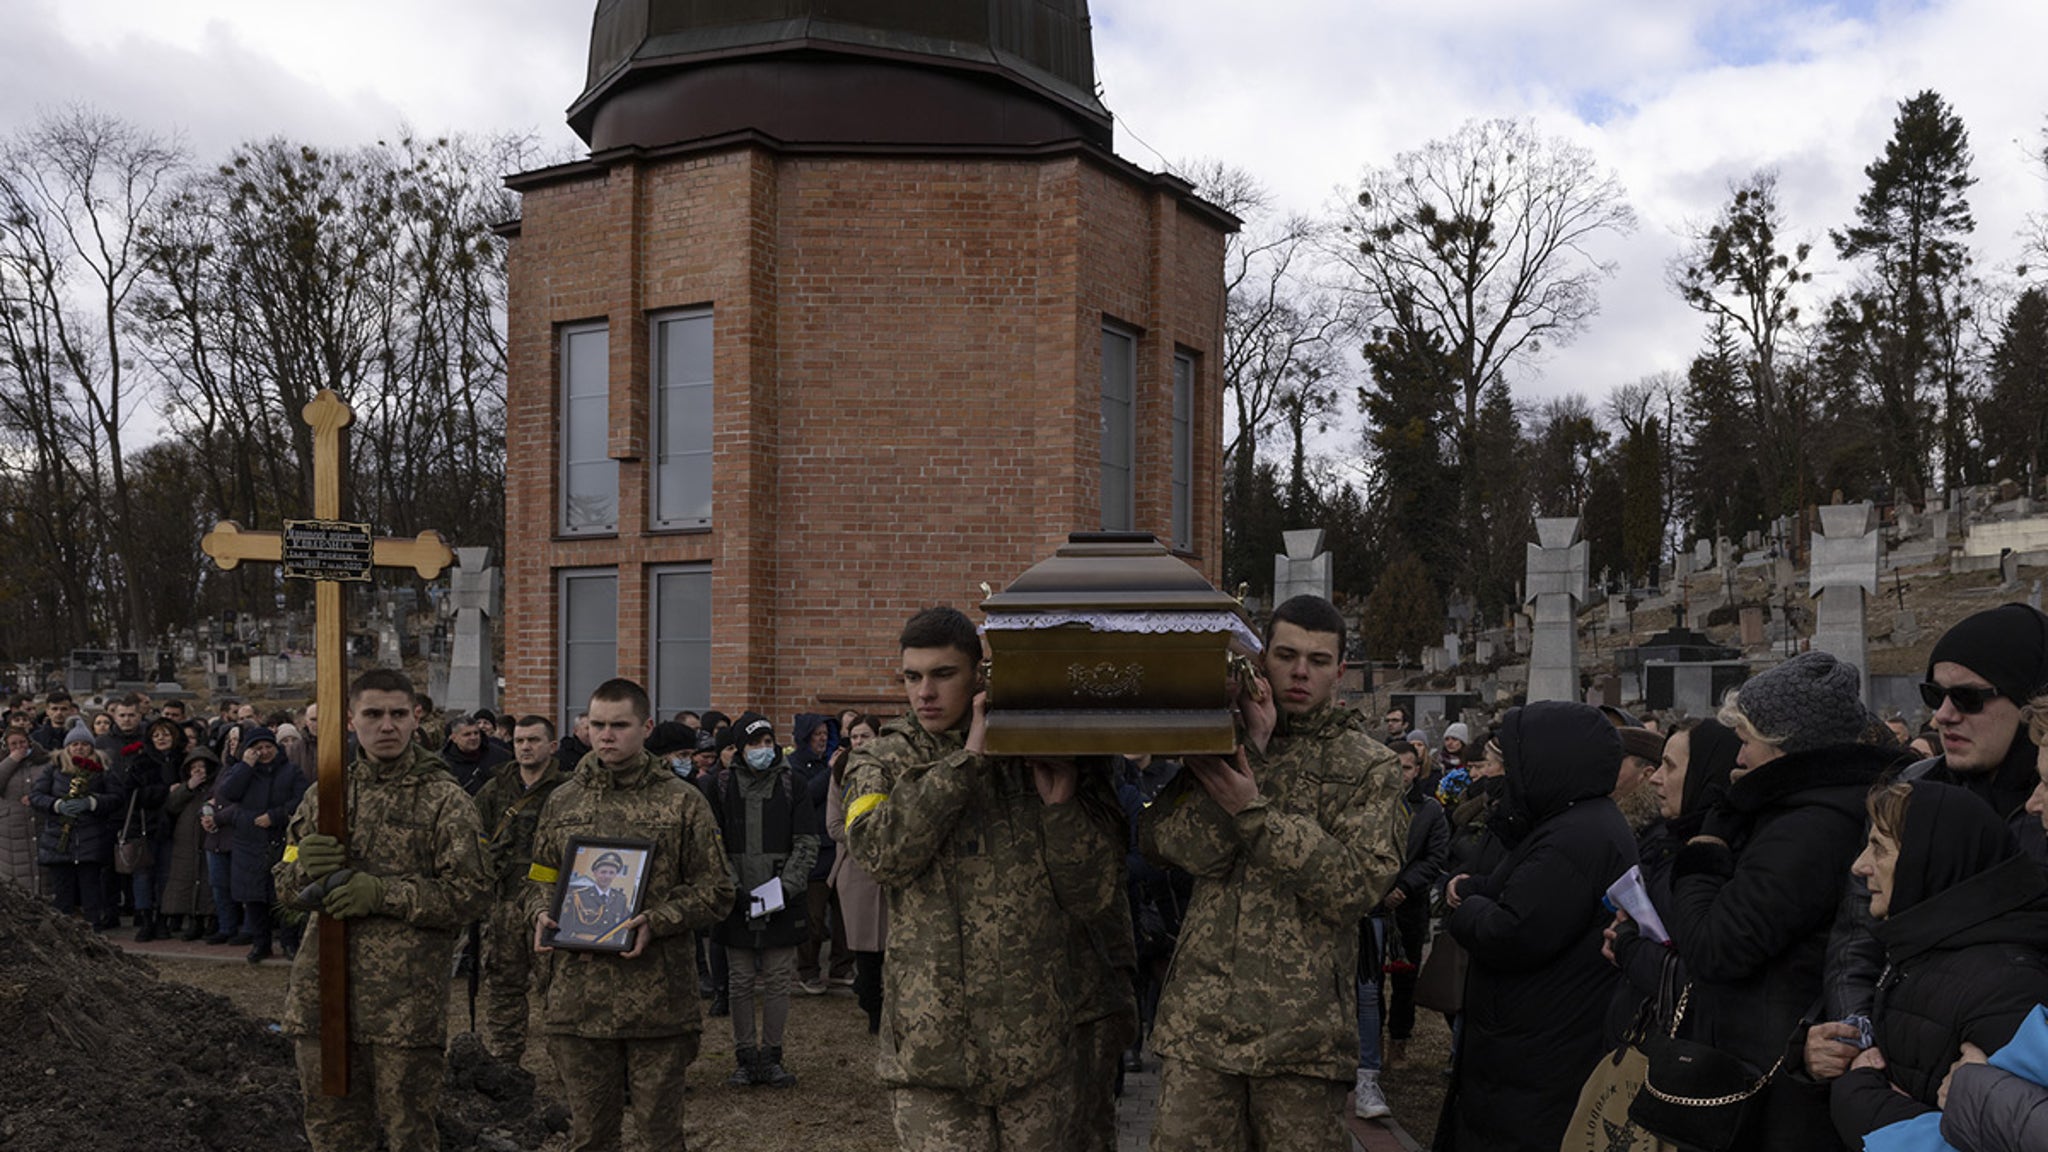 Funeral for Ukrainian Soldiers Killed In War Gets Emotional thumbnail